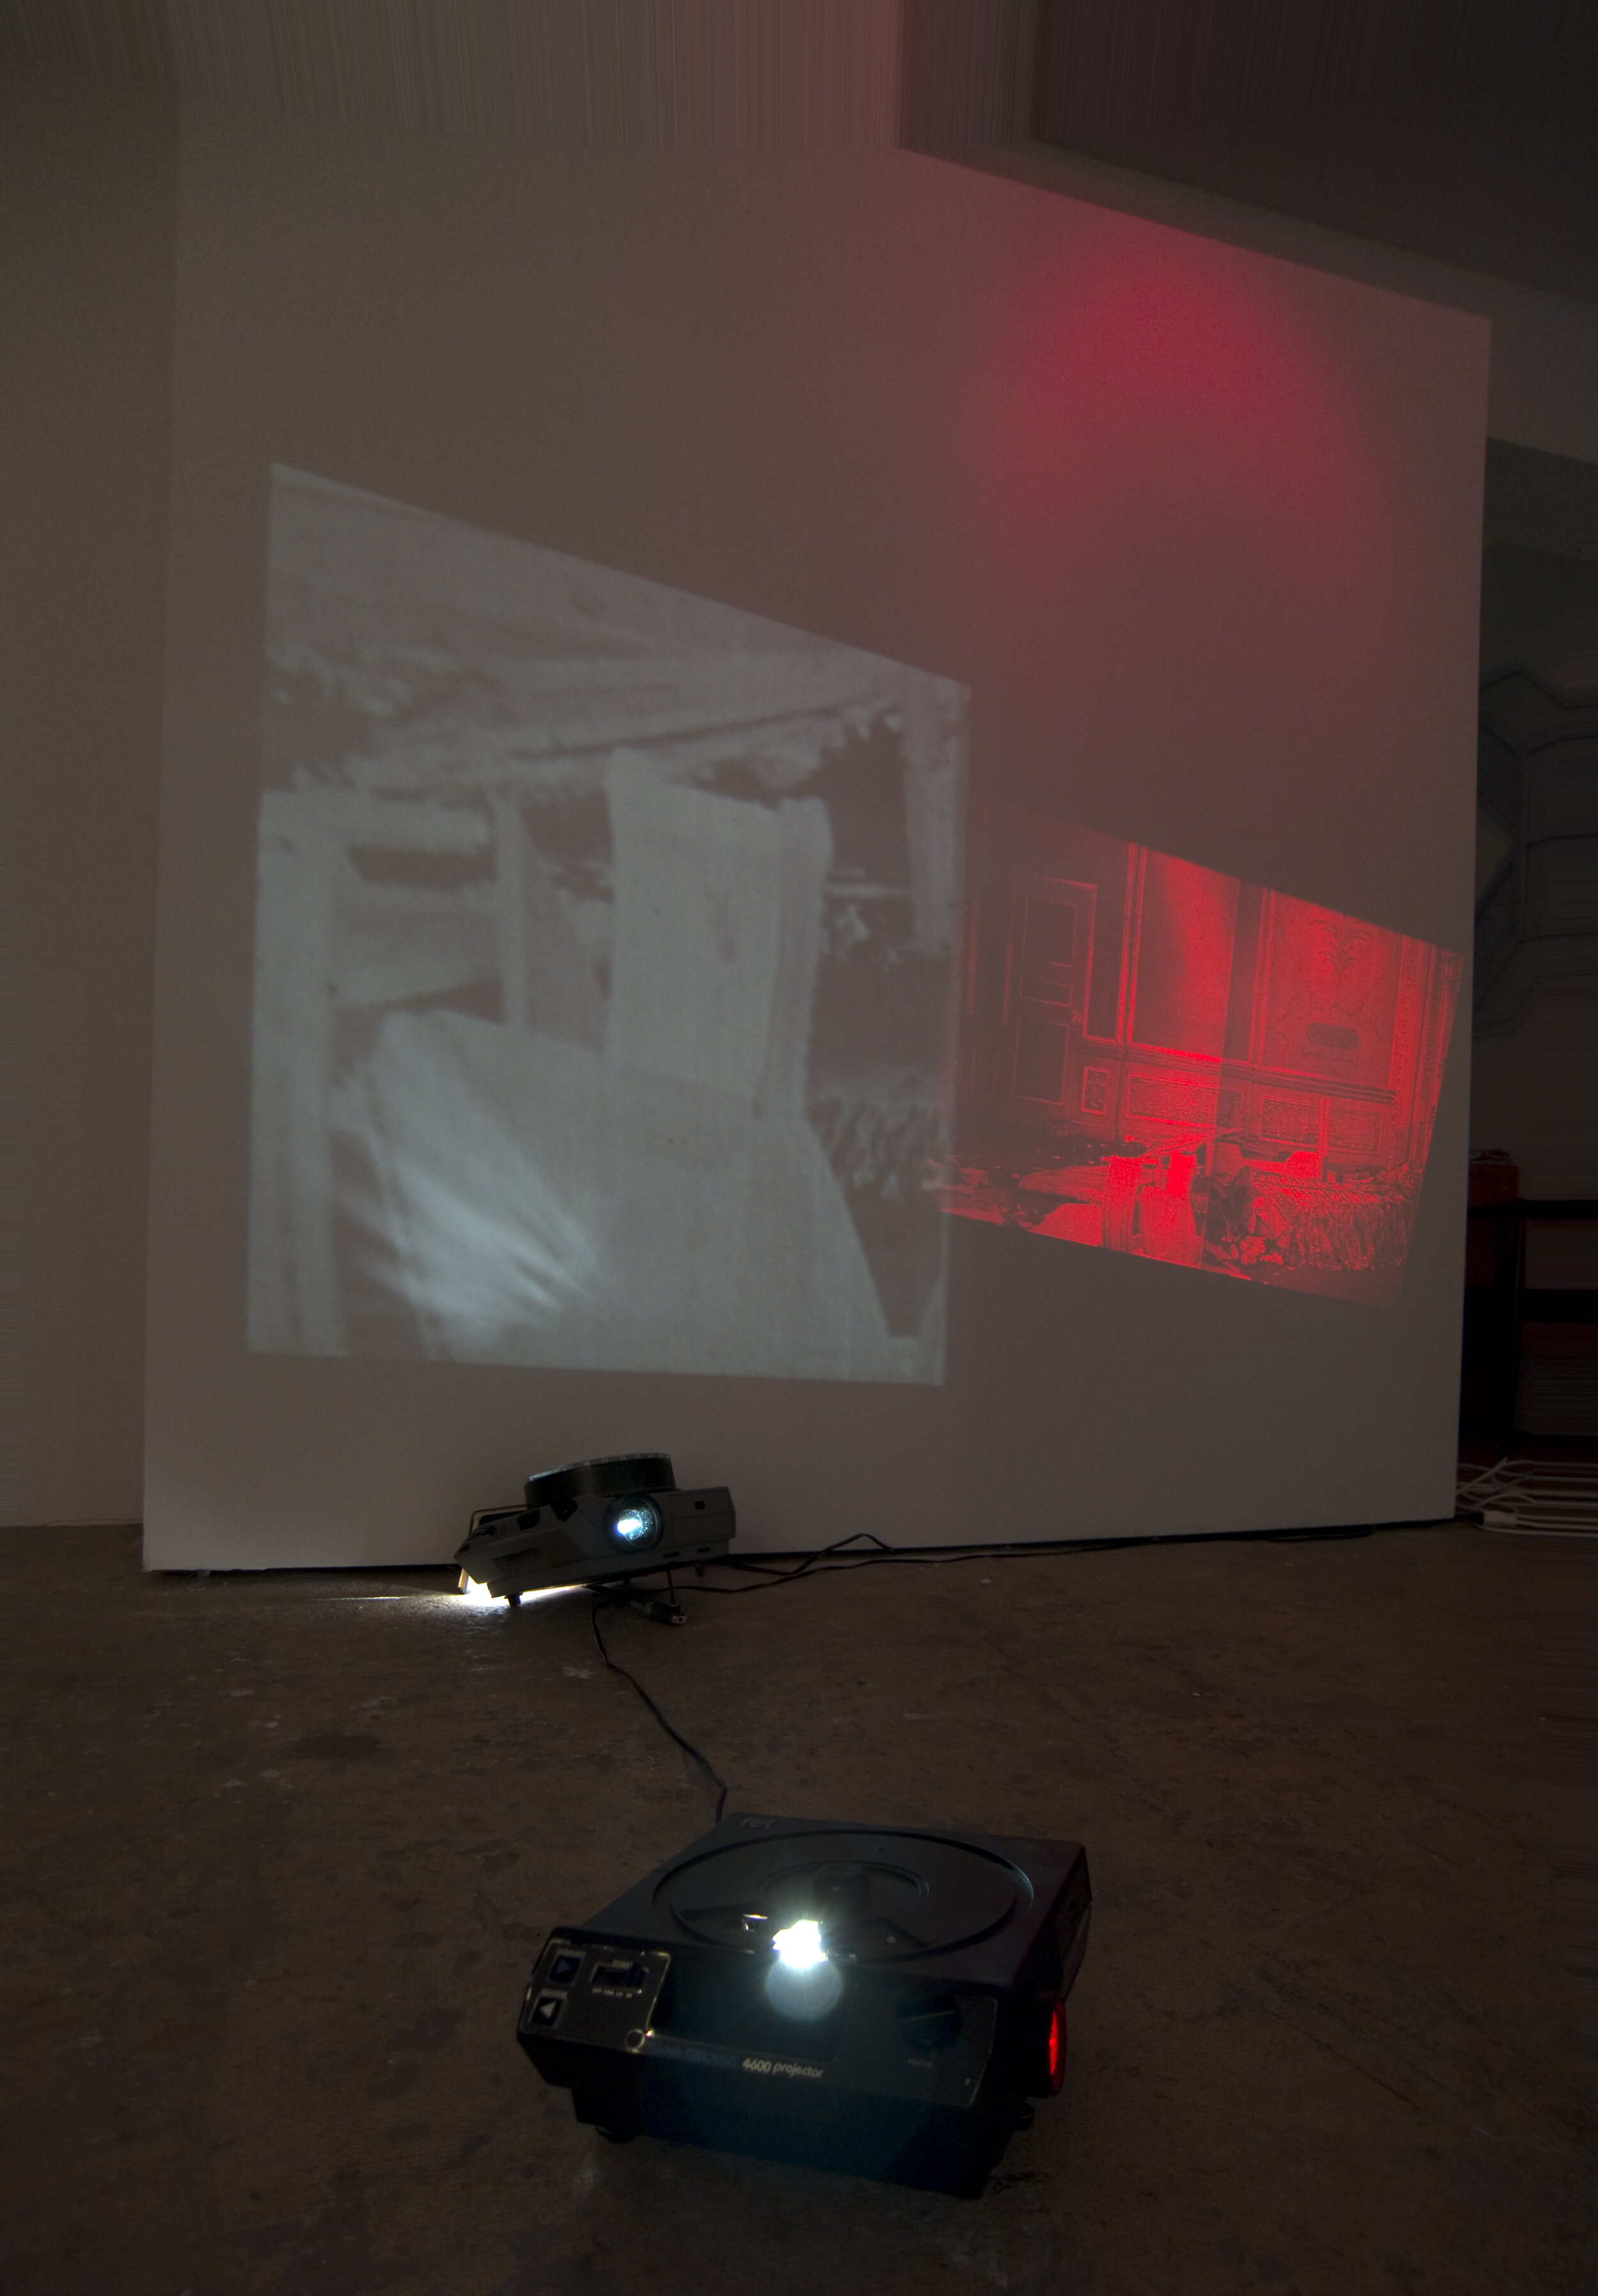 Installation image from the 2013 Valerie Piraino exhibition, Photoplay, at Cindy Rucker Gallery